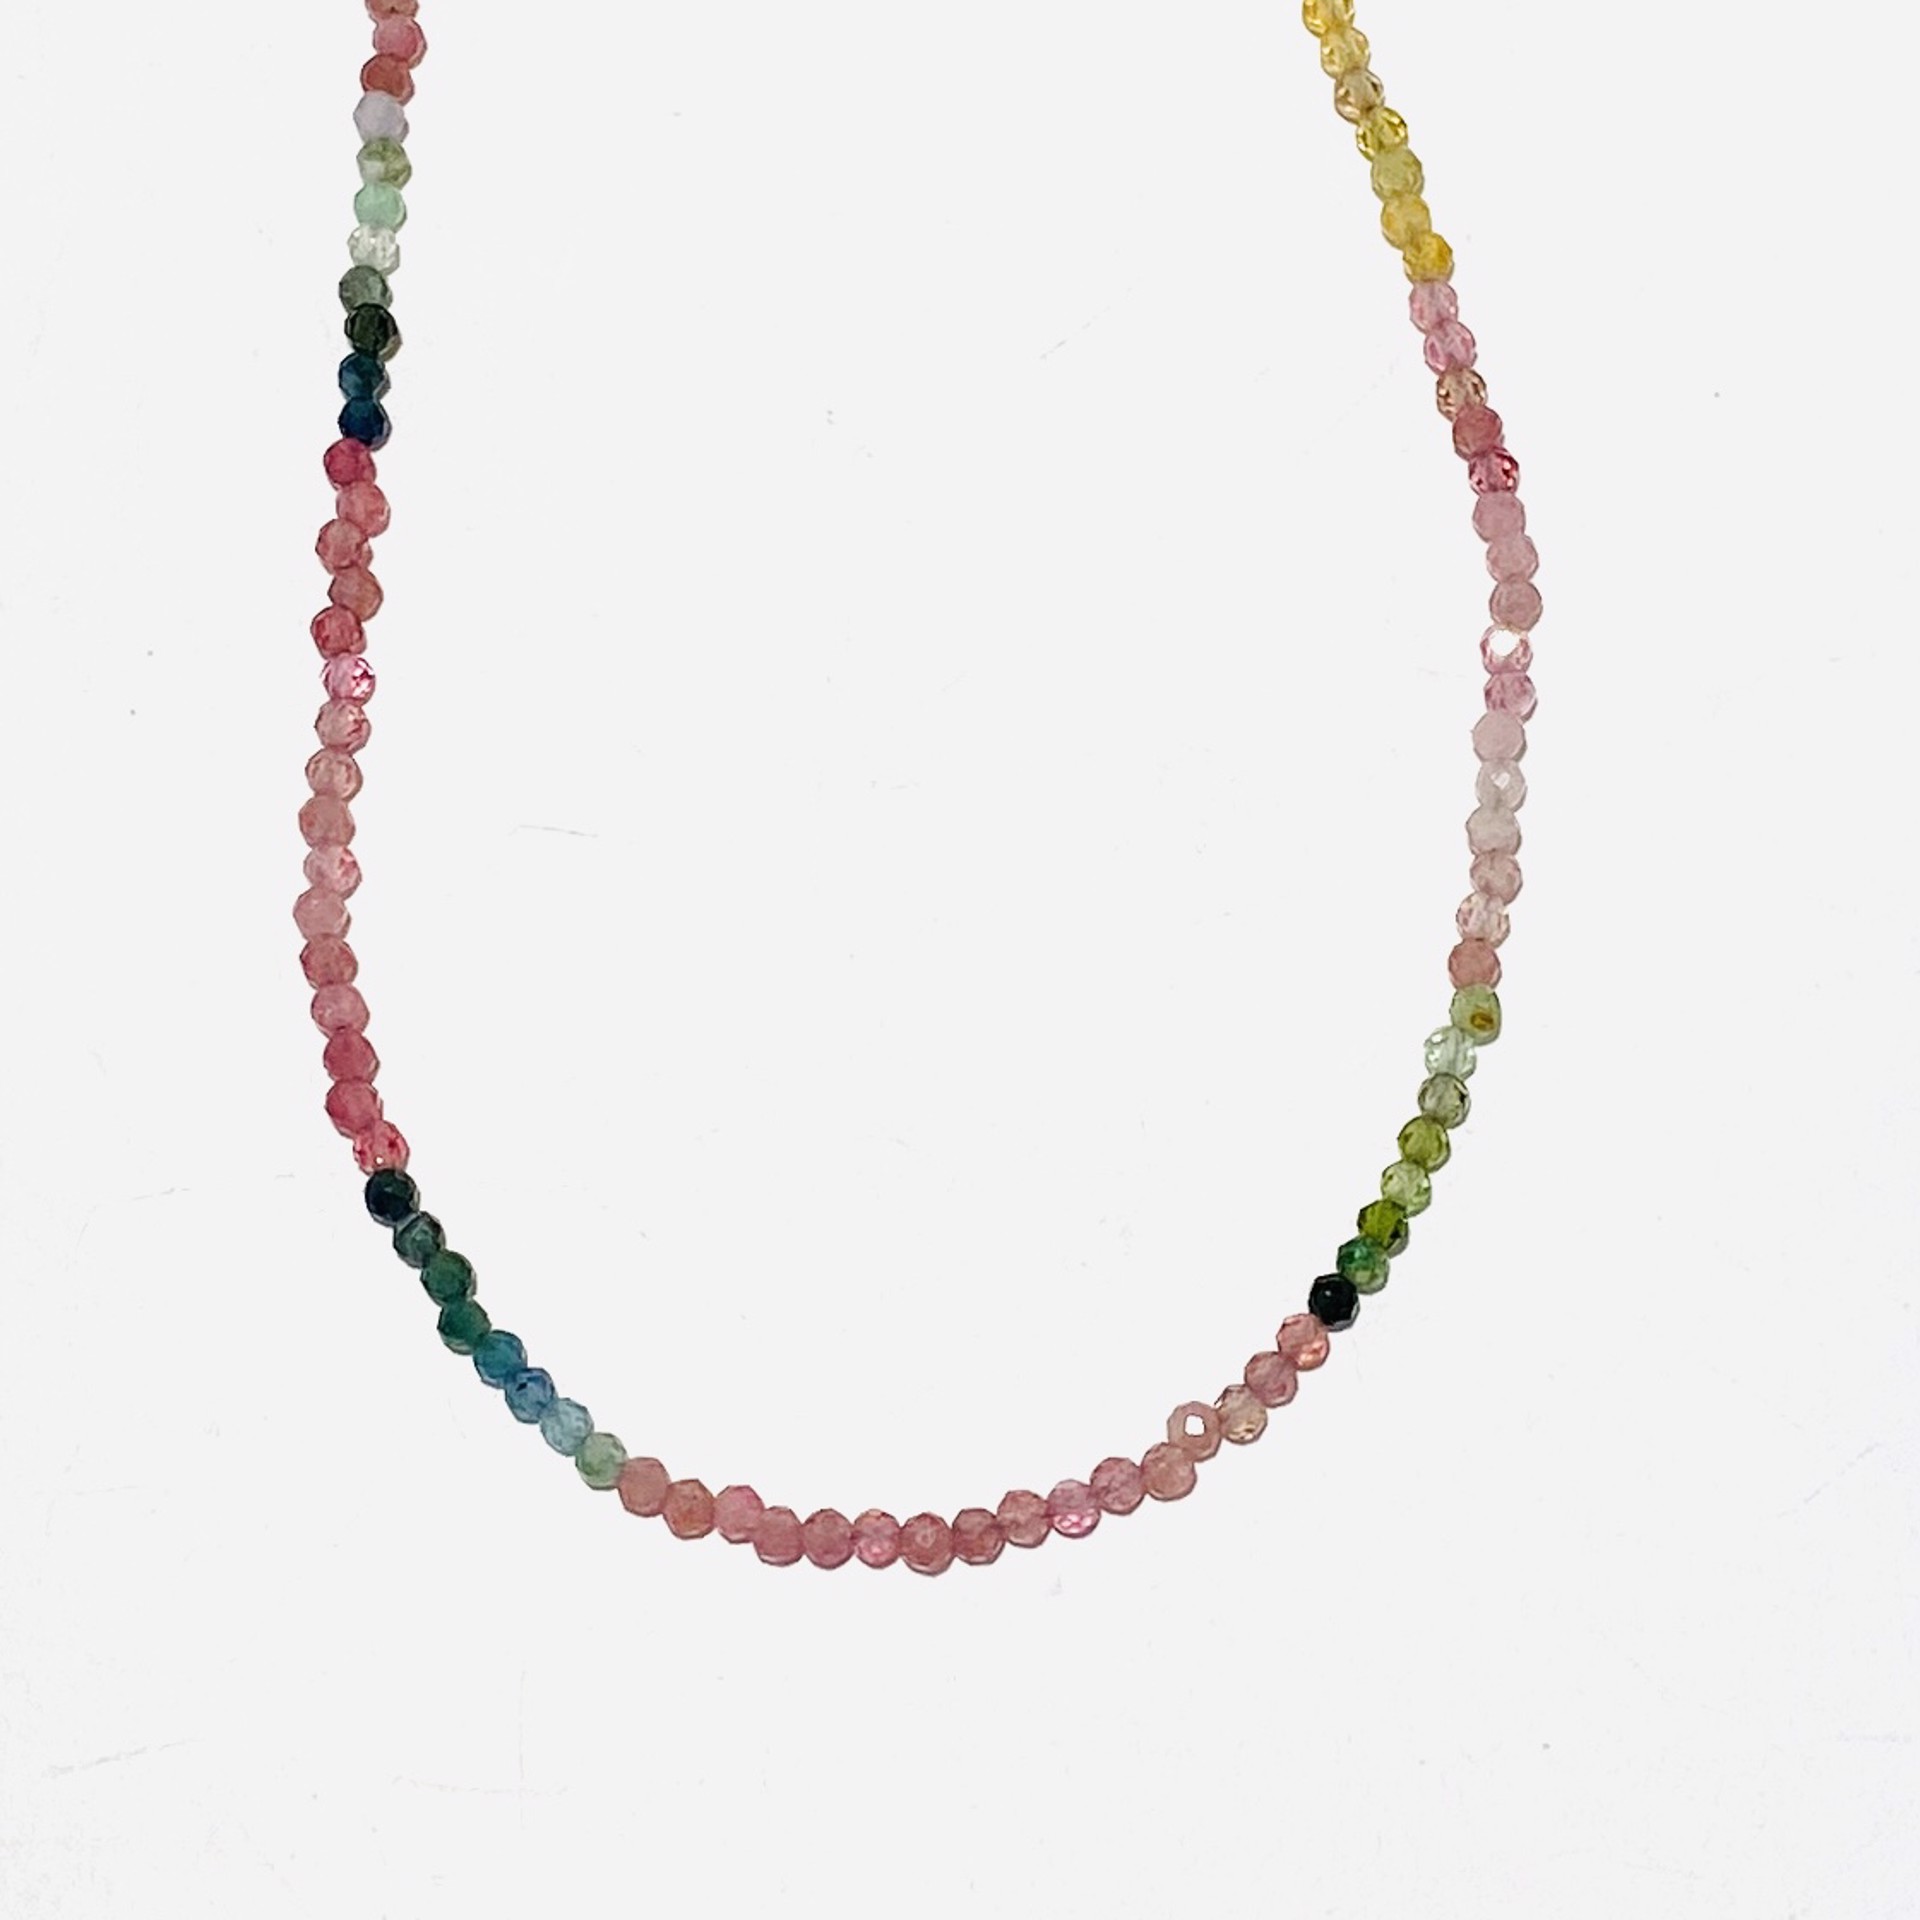 Faceted Multi Color Tourmaline Strand Necklace NT22-249 by Nance Trueworthy